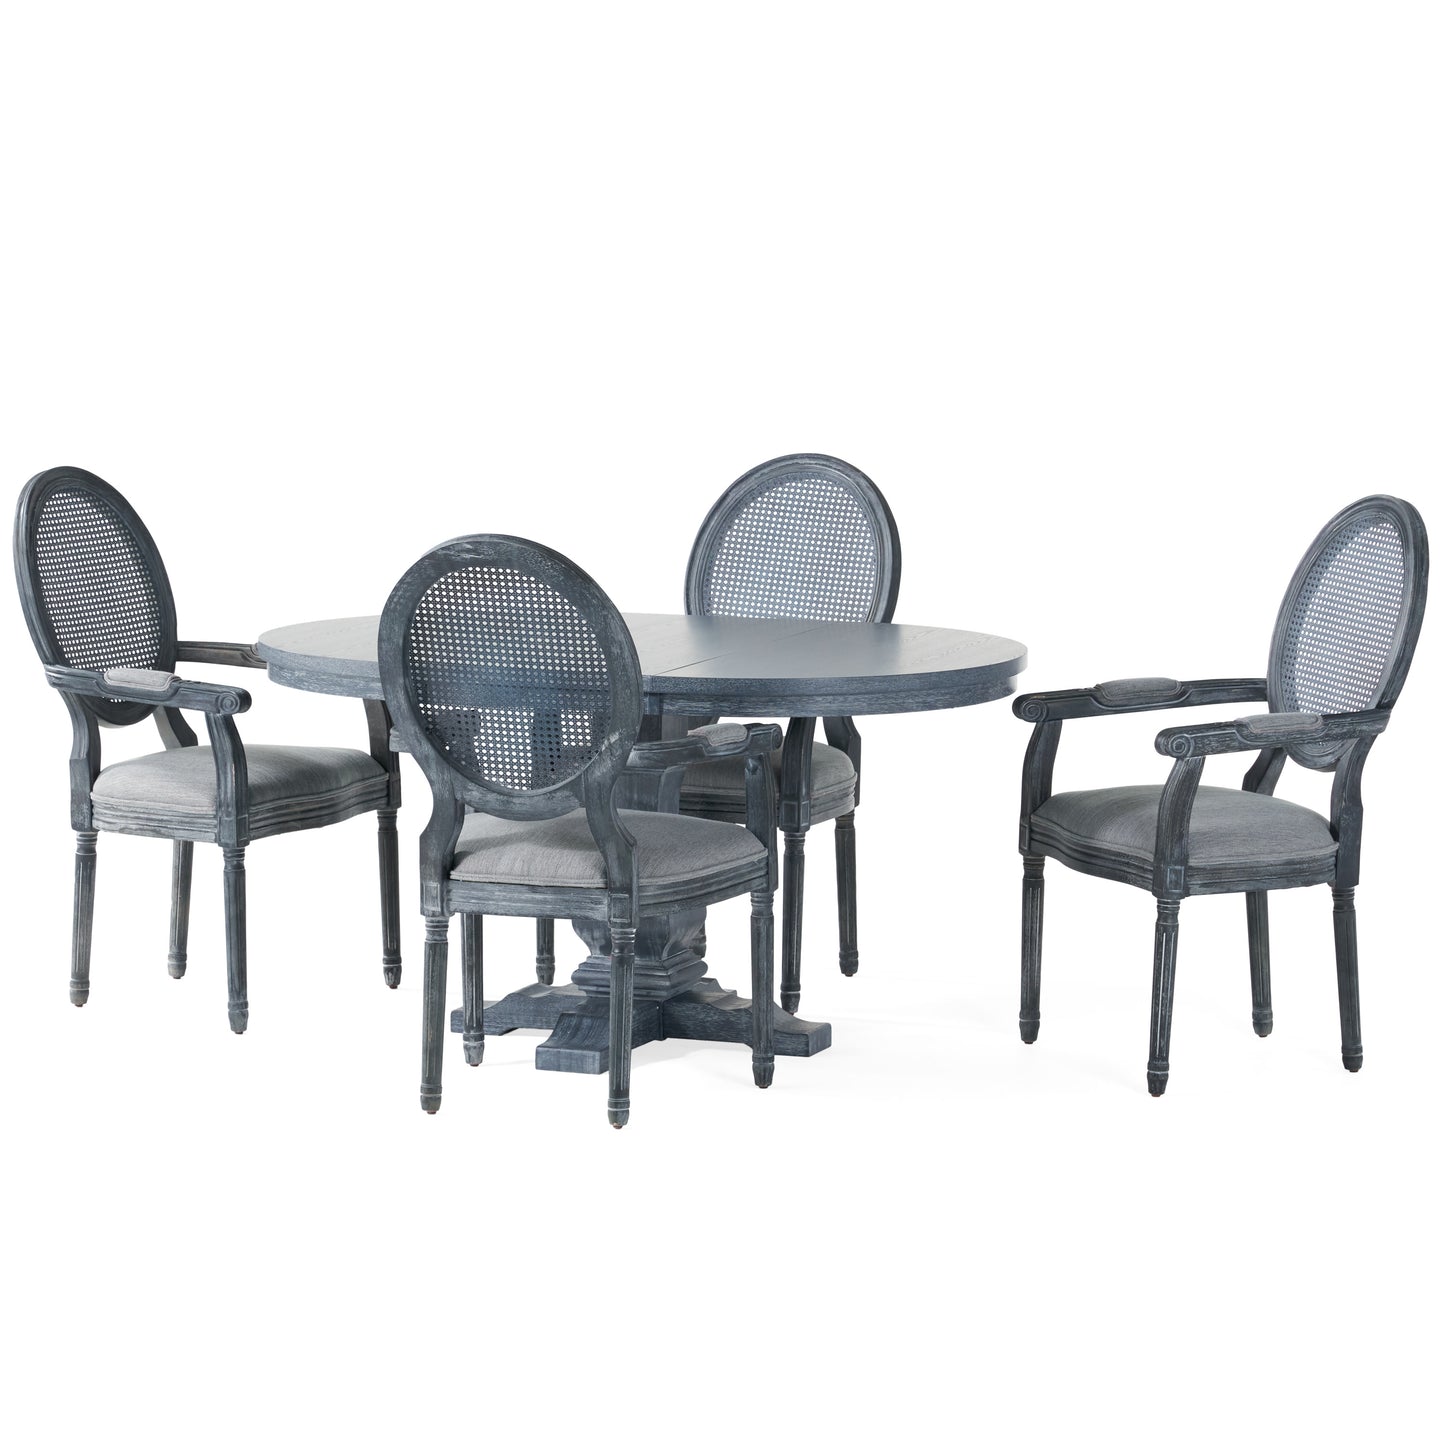 Ismay French Country Wood and Cane 5-Piece Expandable Oval Dining Set